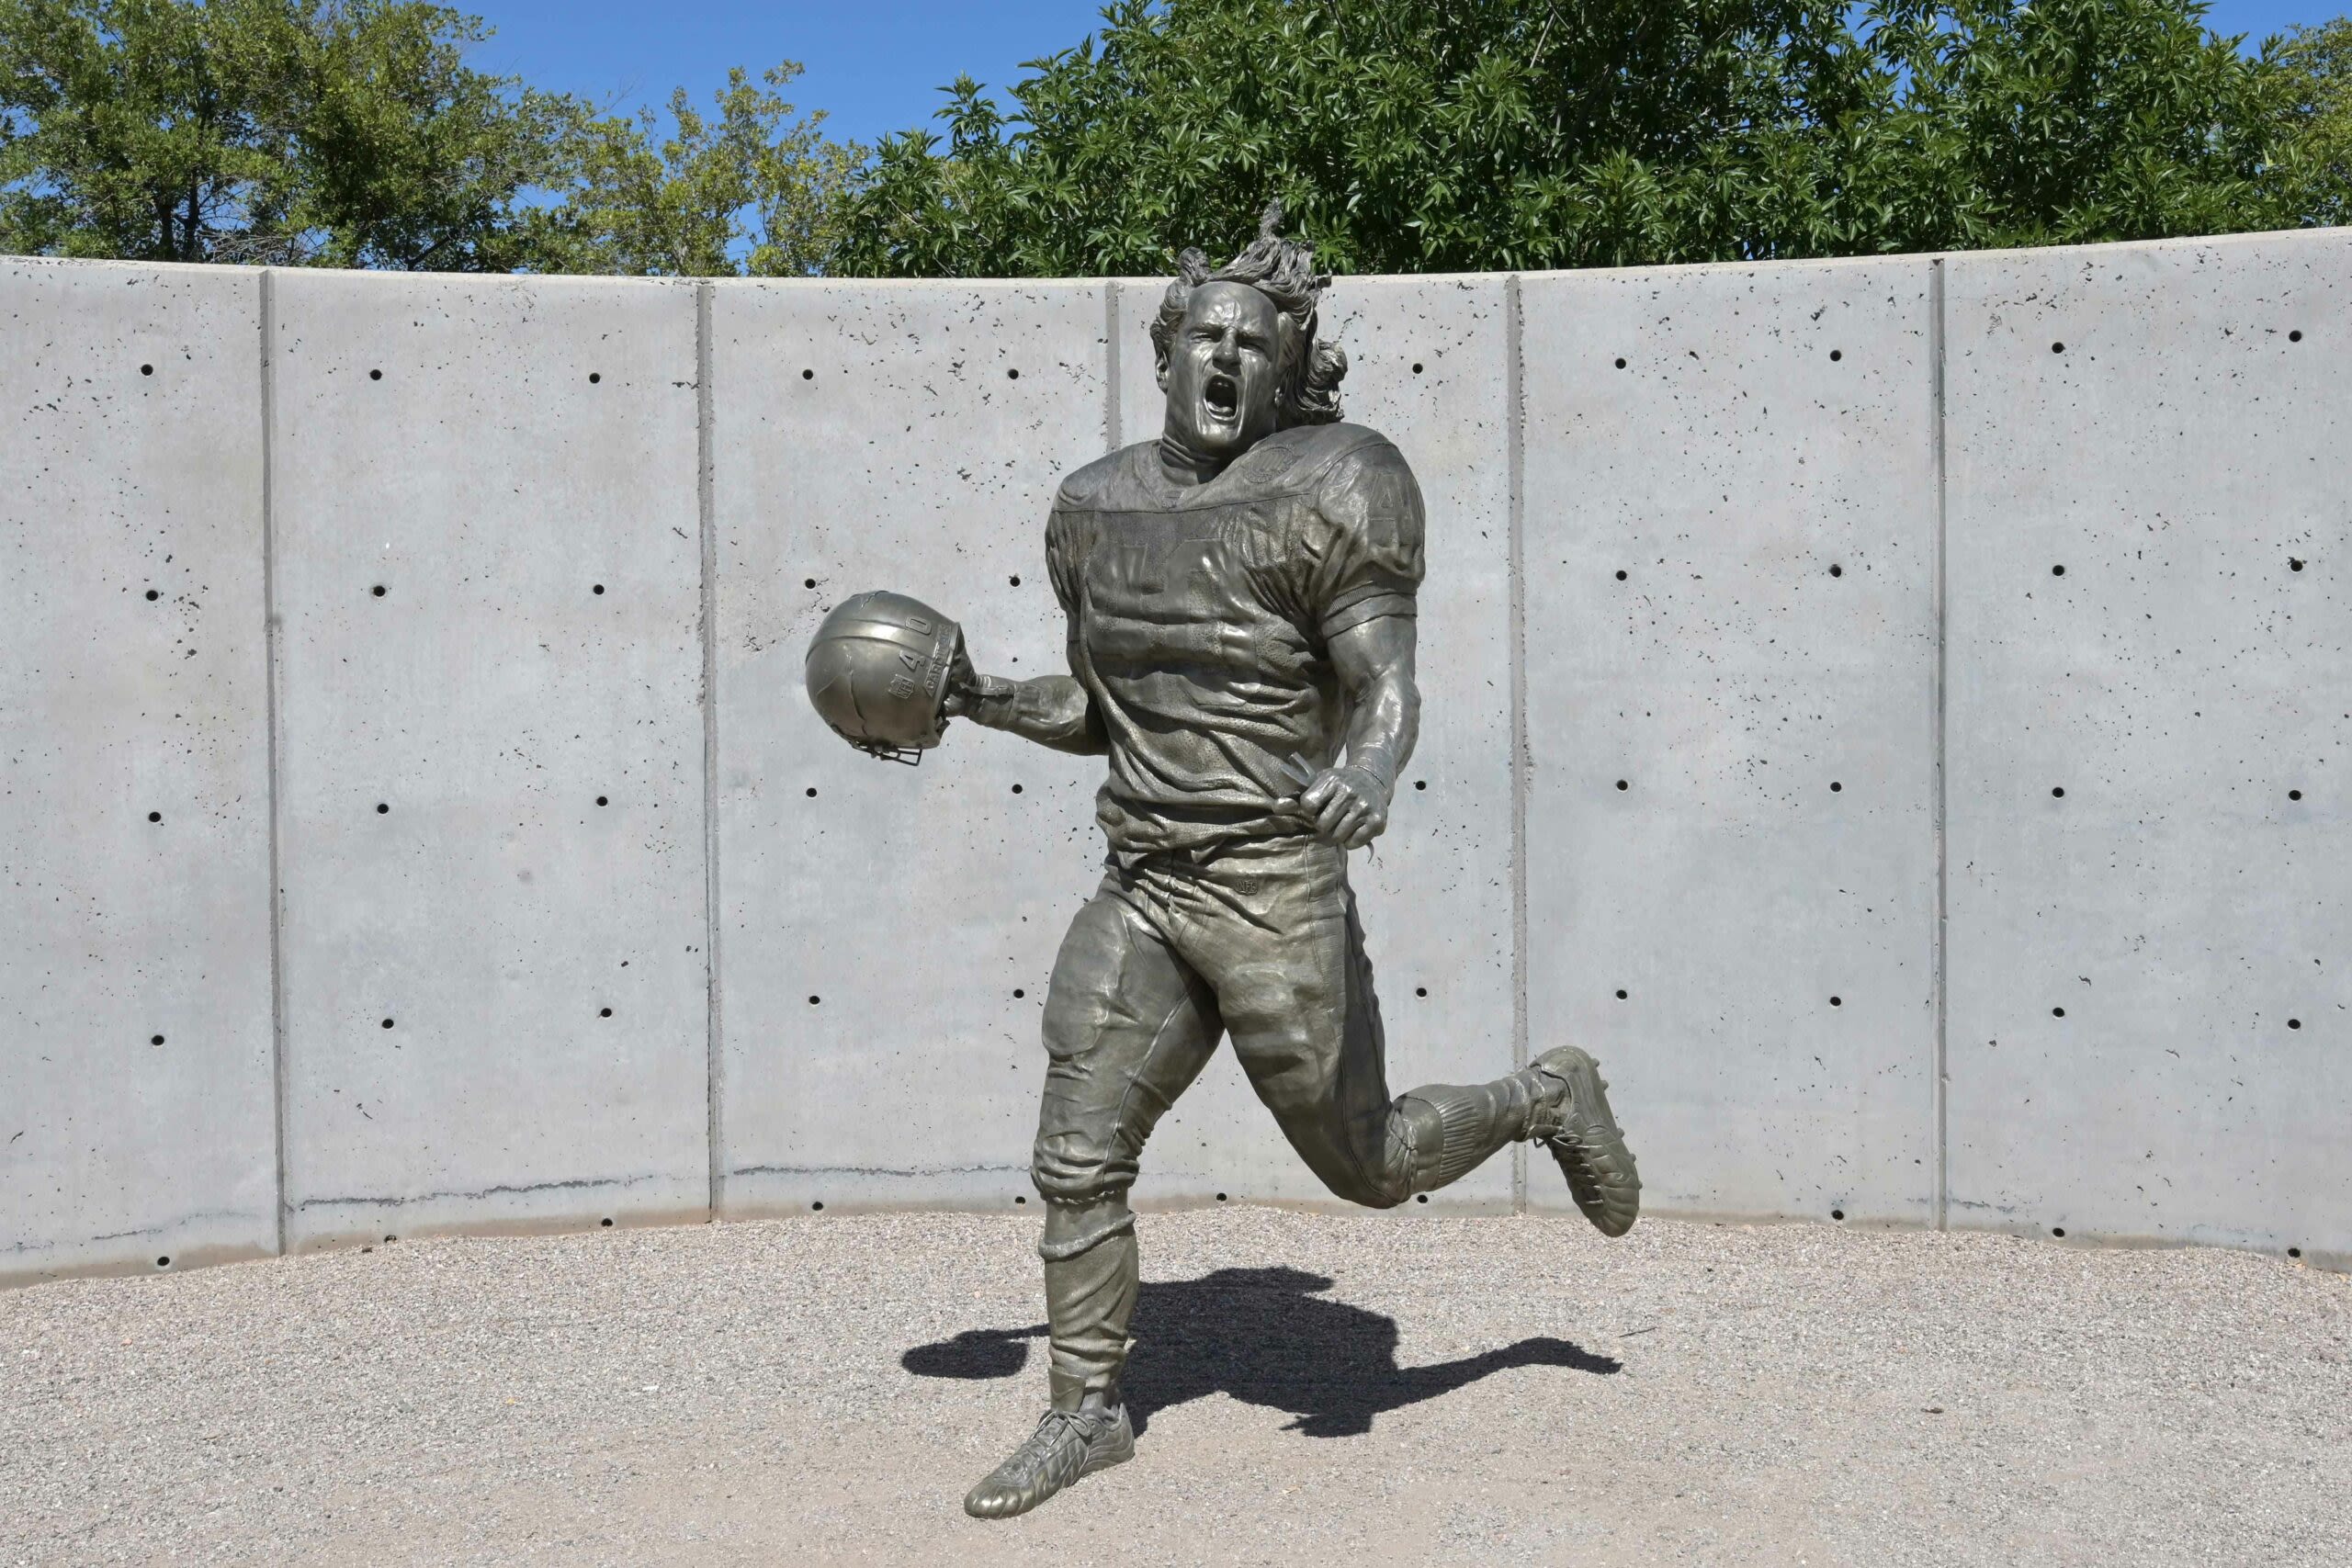 Pro Football Hall of Fame has special Pat Tillman display for Memorial Day